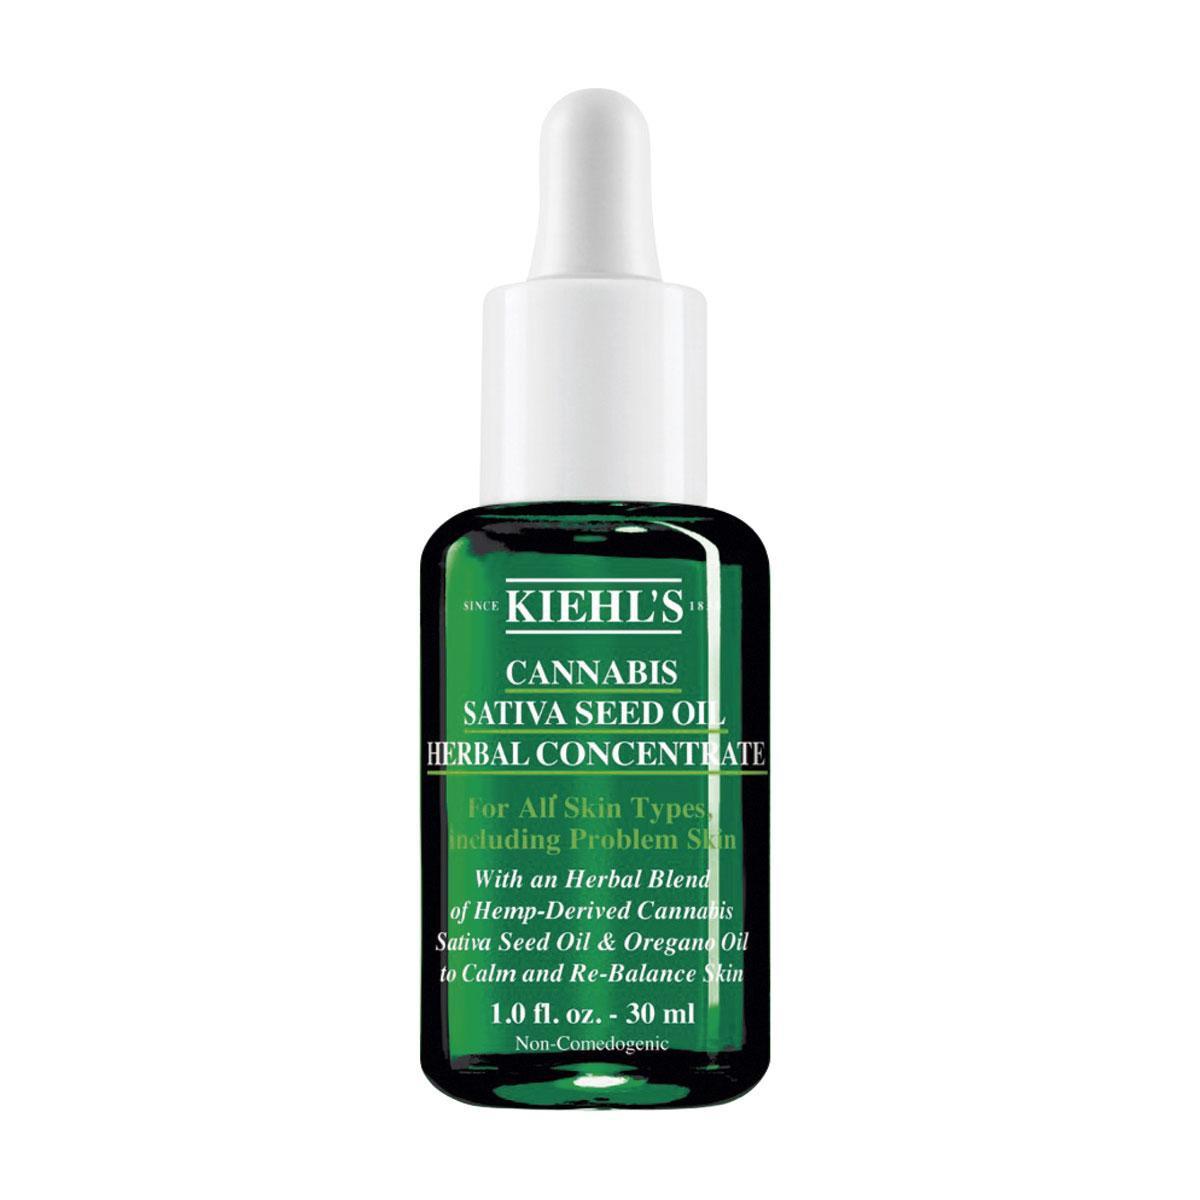 Cannabis Sativa Seed Oil Herbal Concentrate, Kiehl's, 46 euros les 30 ml.